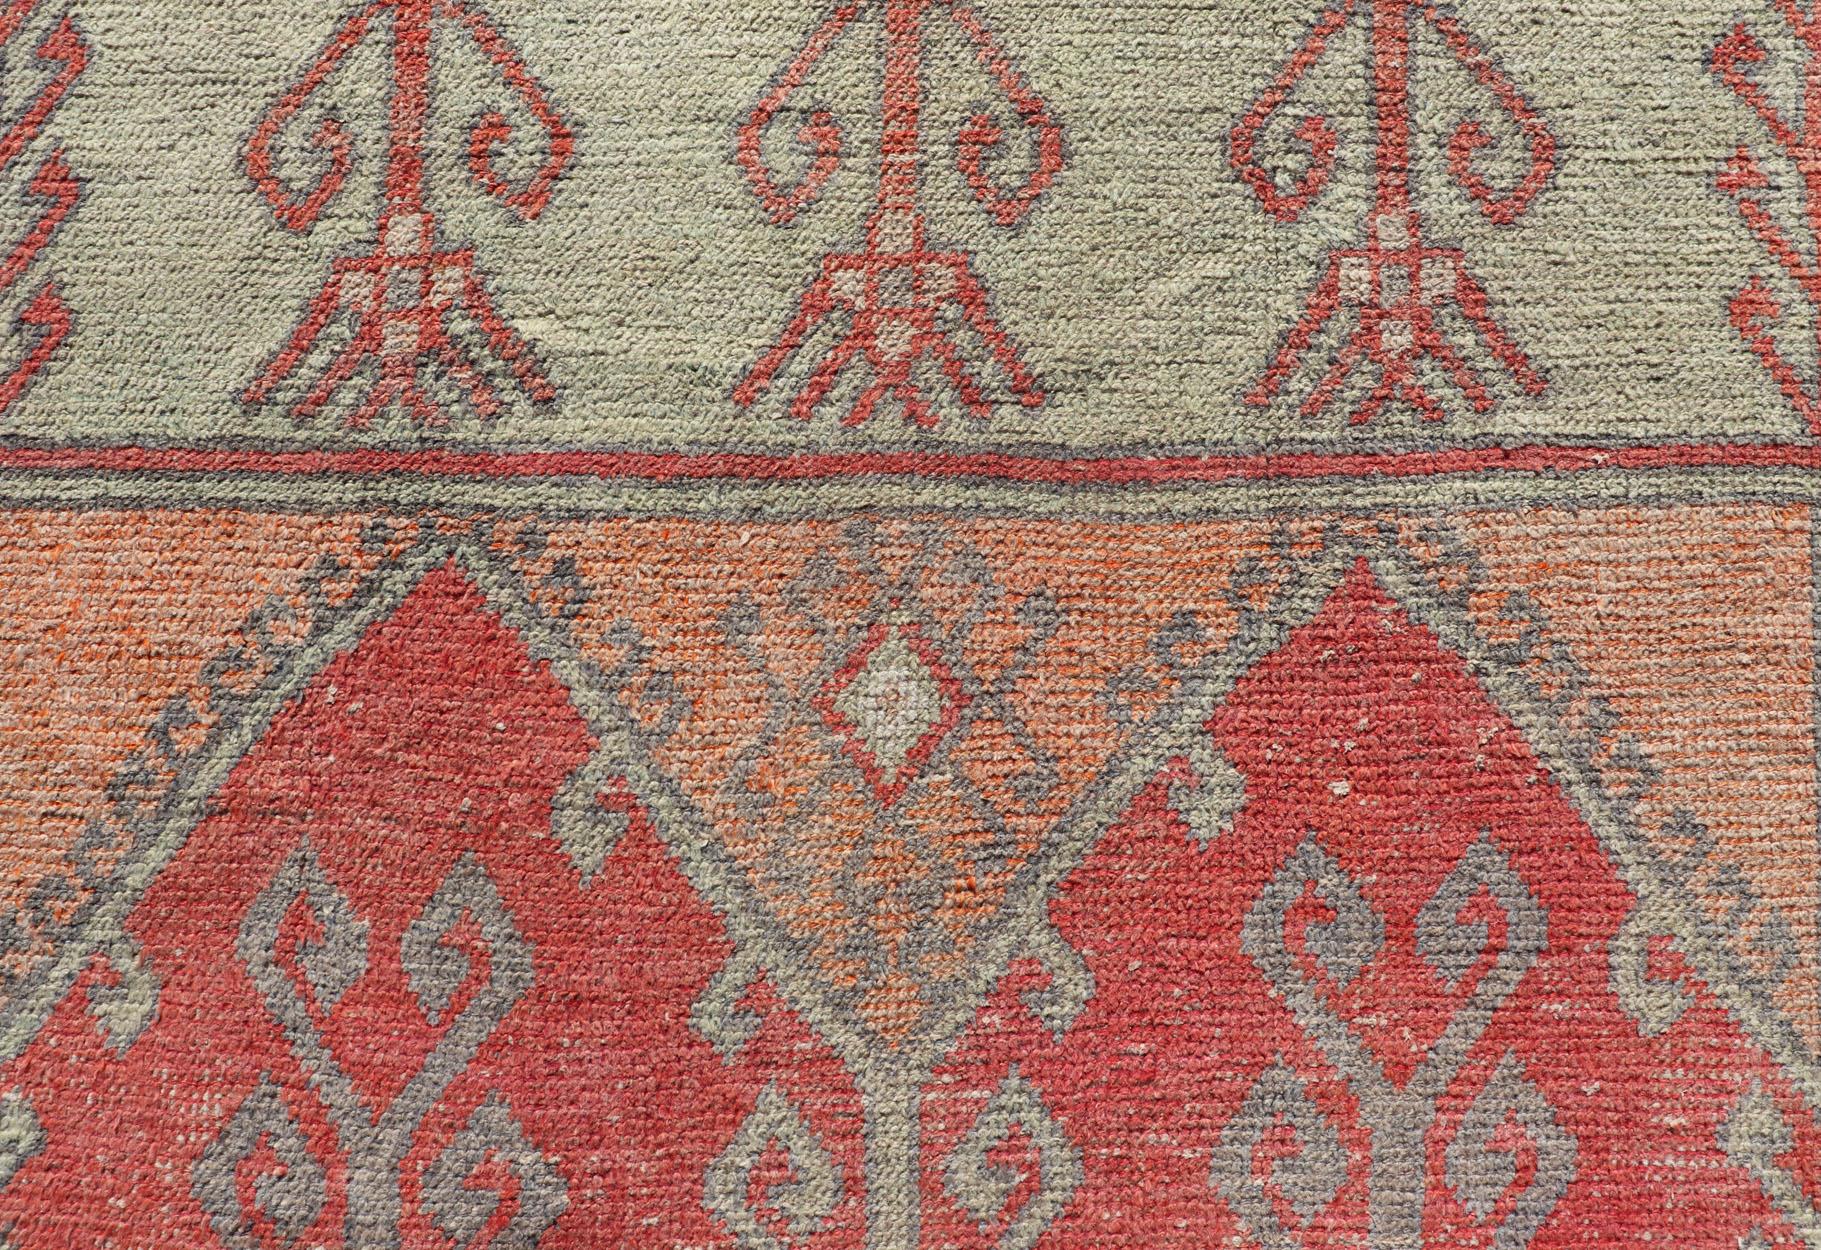 Gallery Rug, Vintage Turkish in Faded Red, Coral, Orange, Soft Pink and Green For Sale 9